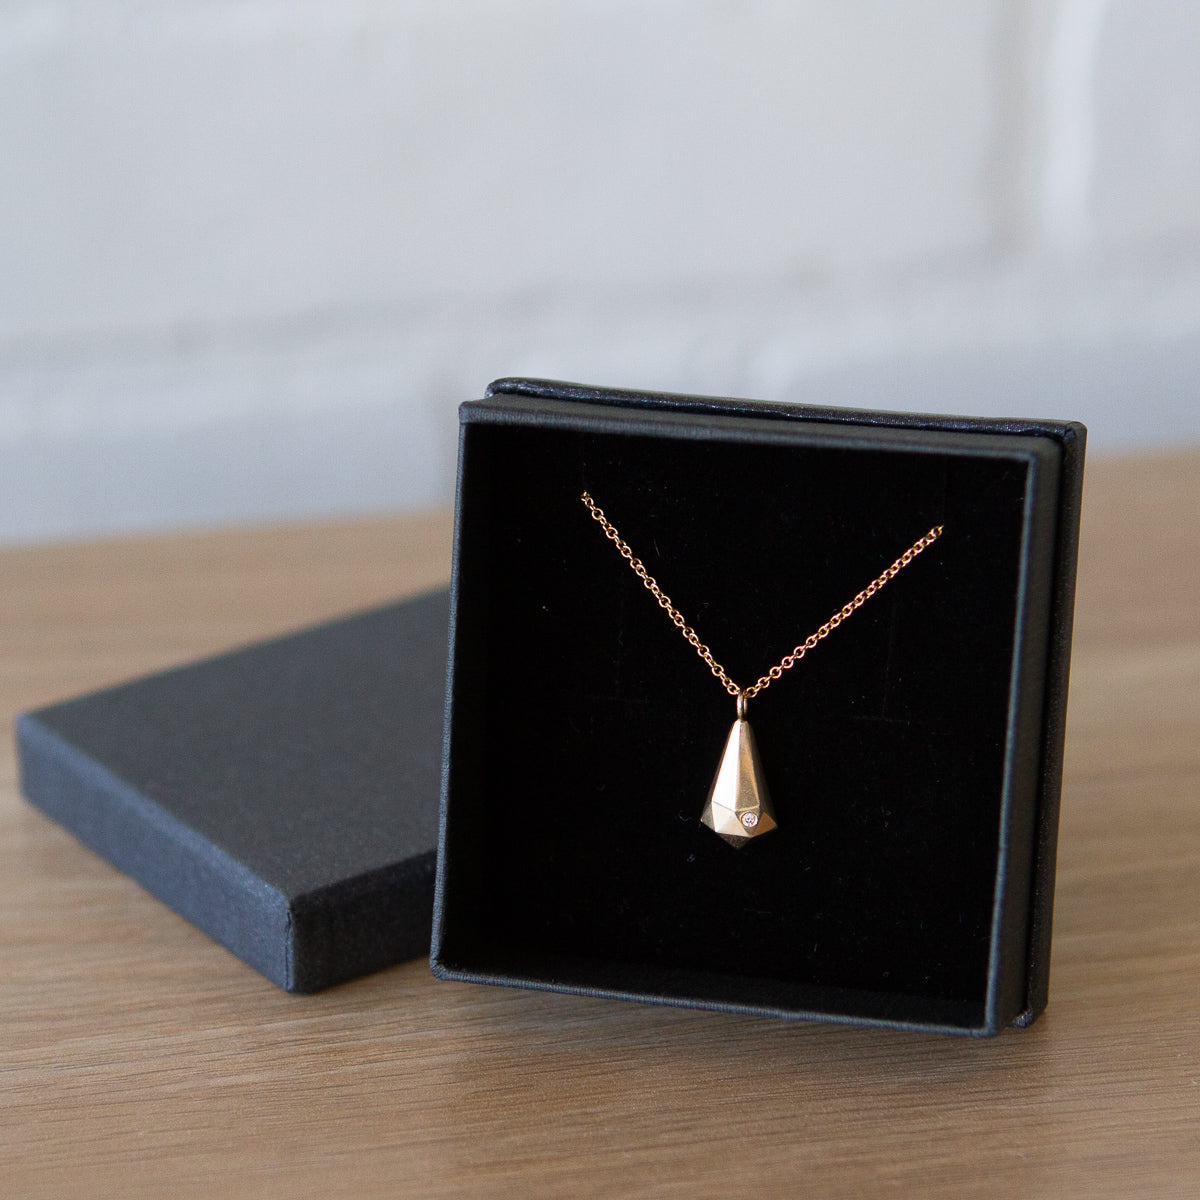 14k yellow gold faceted crystal fragment pendant with a diamond and a gold chain in a gift box